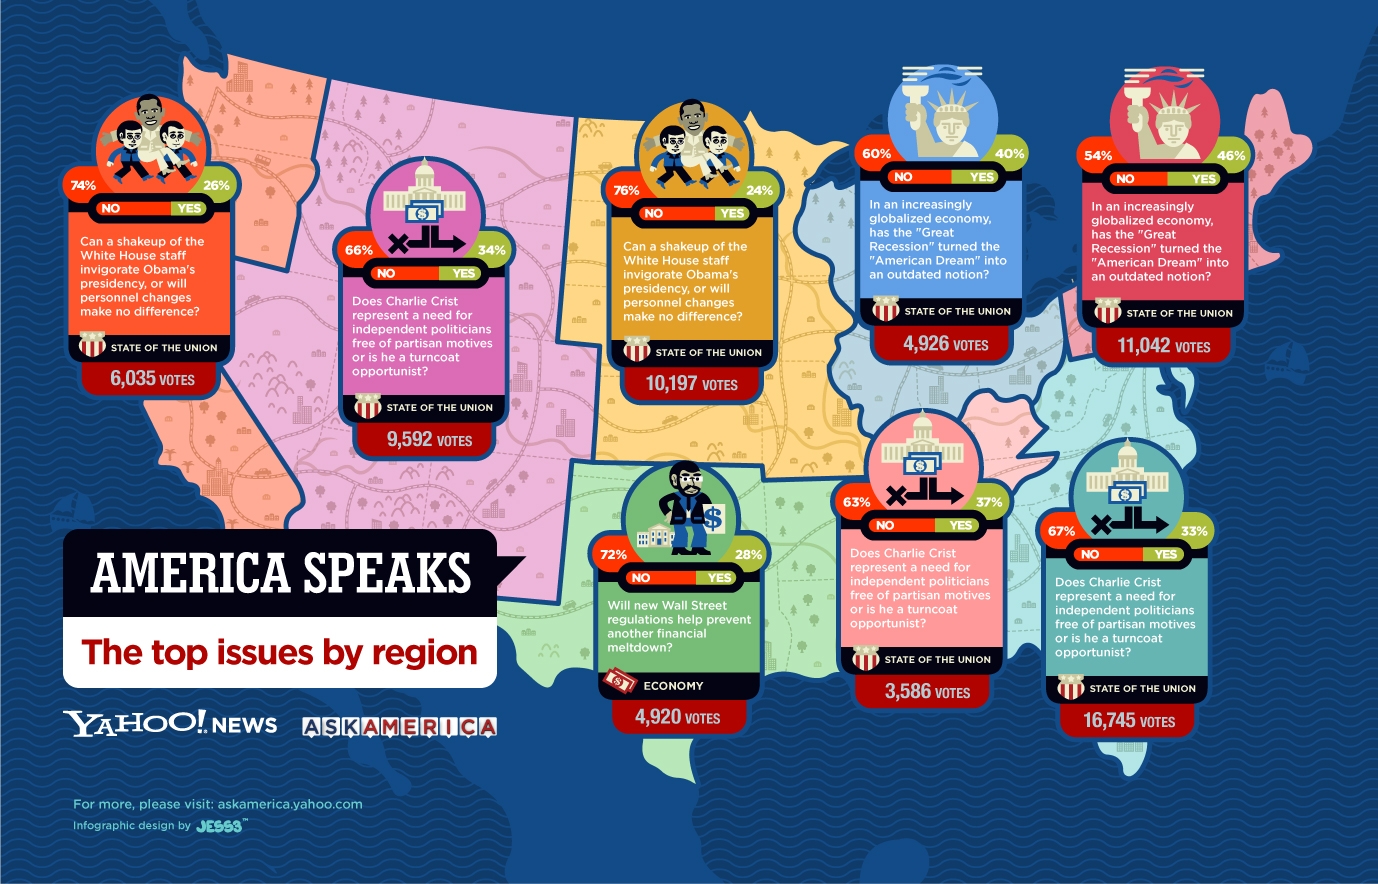 Where Do Americans Stand on Issues at Midterm Elections? [INFOGRAPHIC]